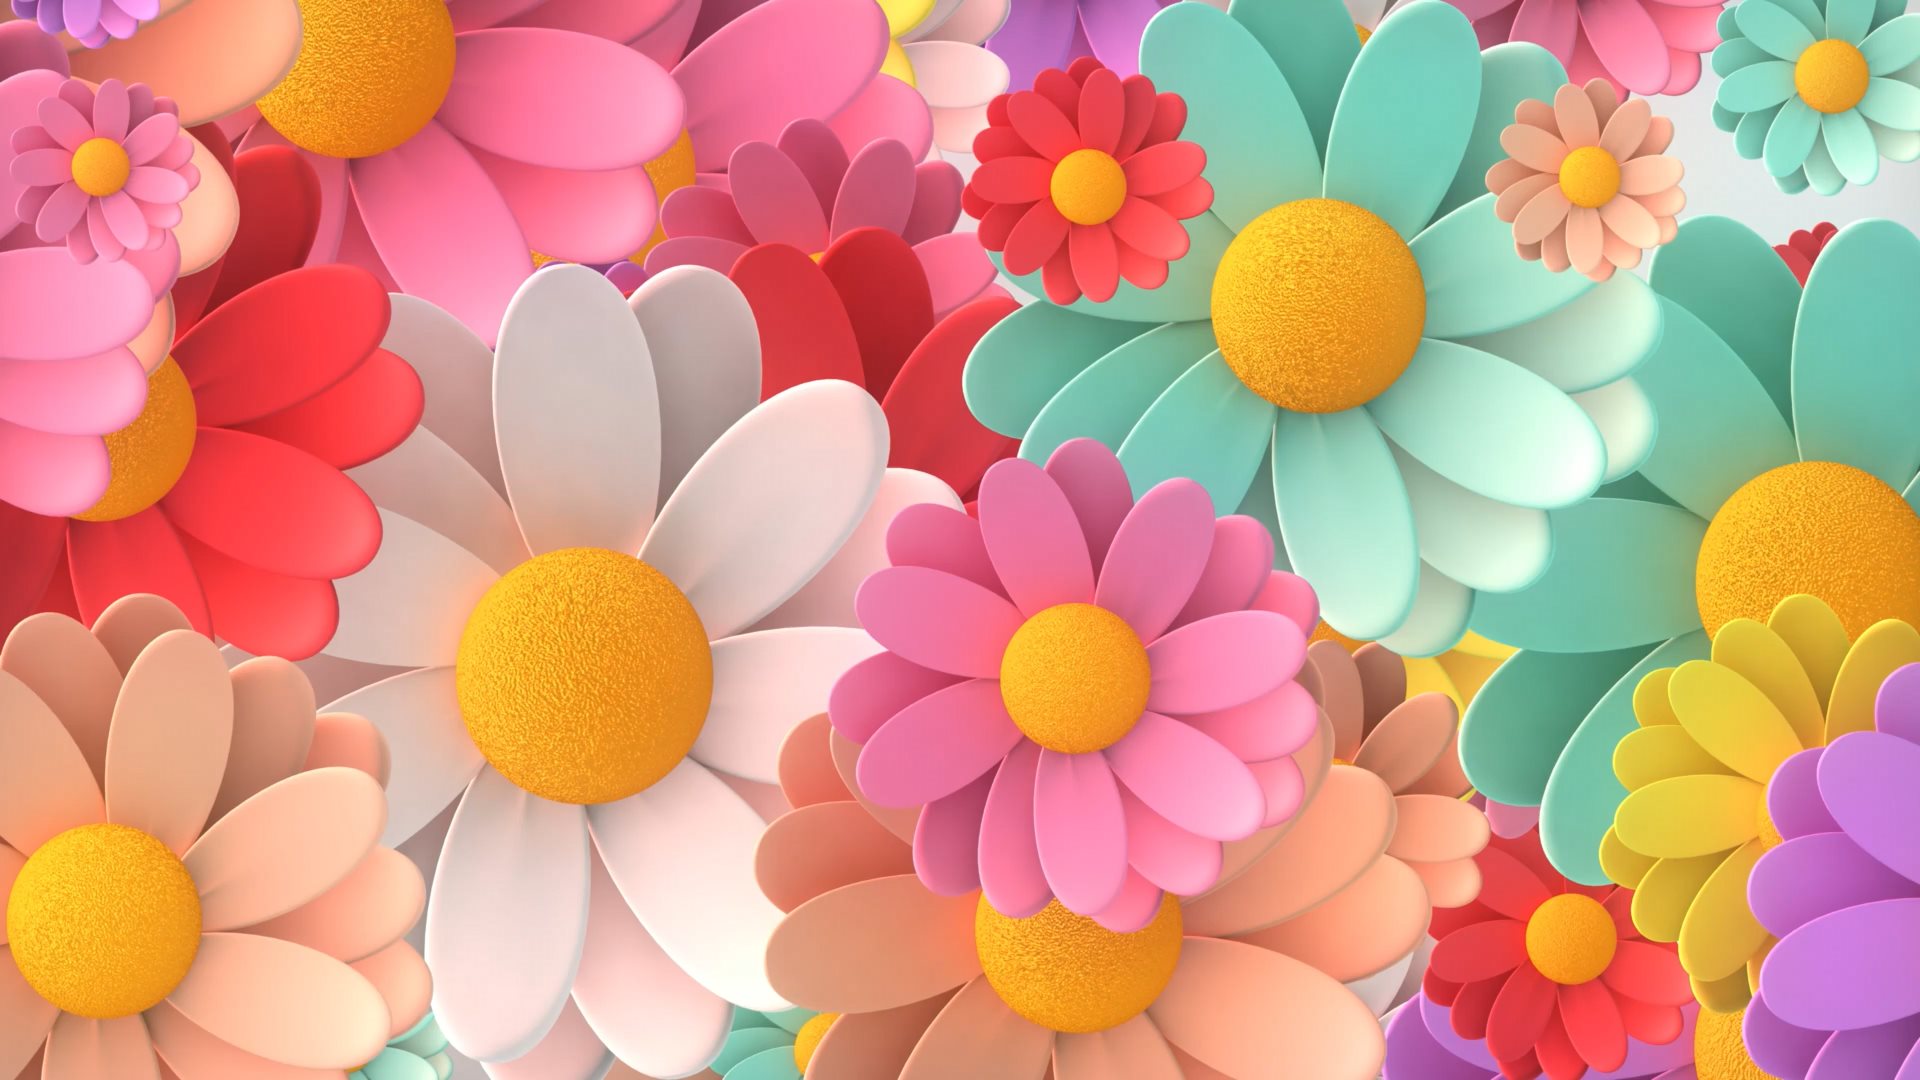 Video of colorful daisies turning